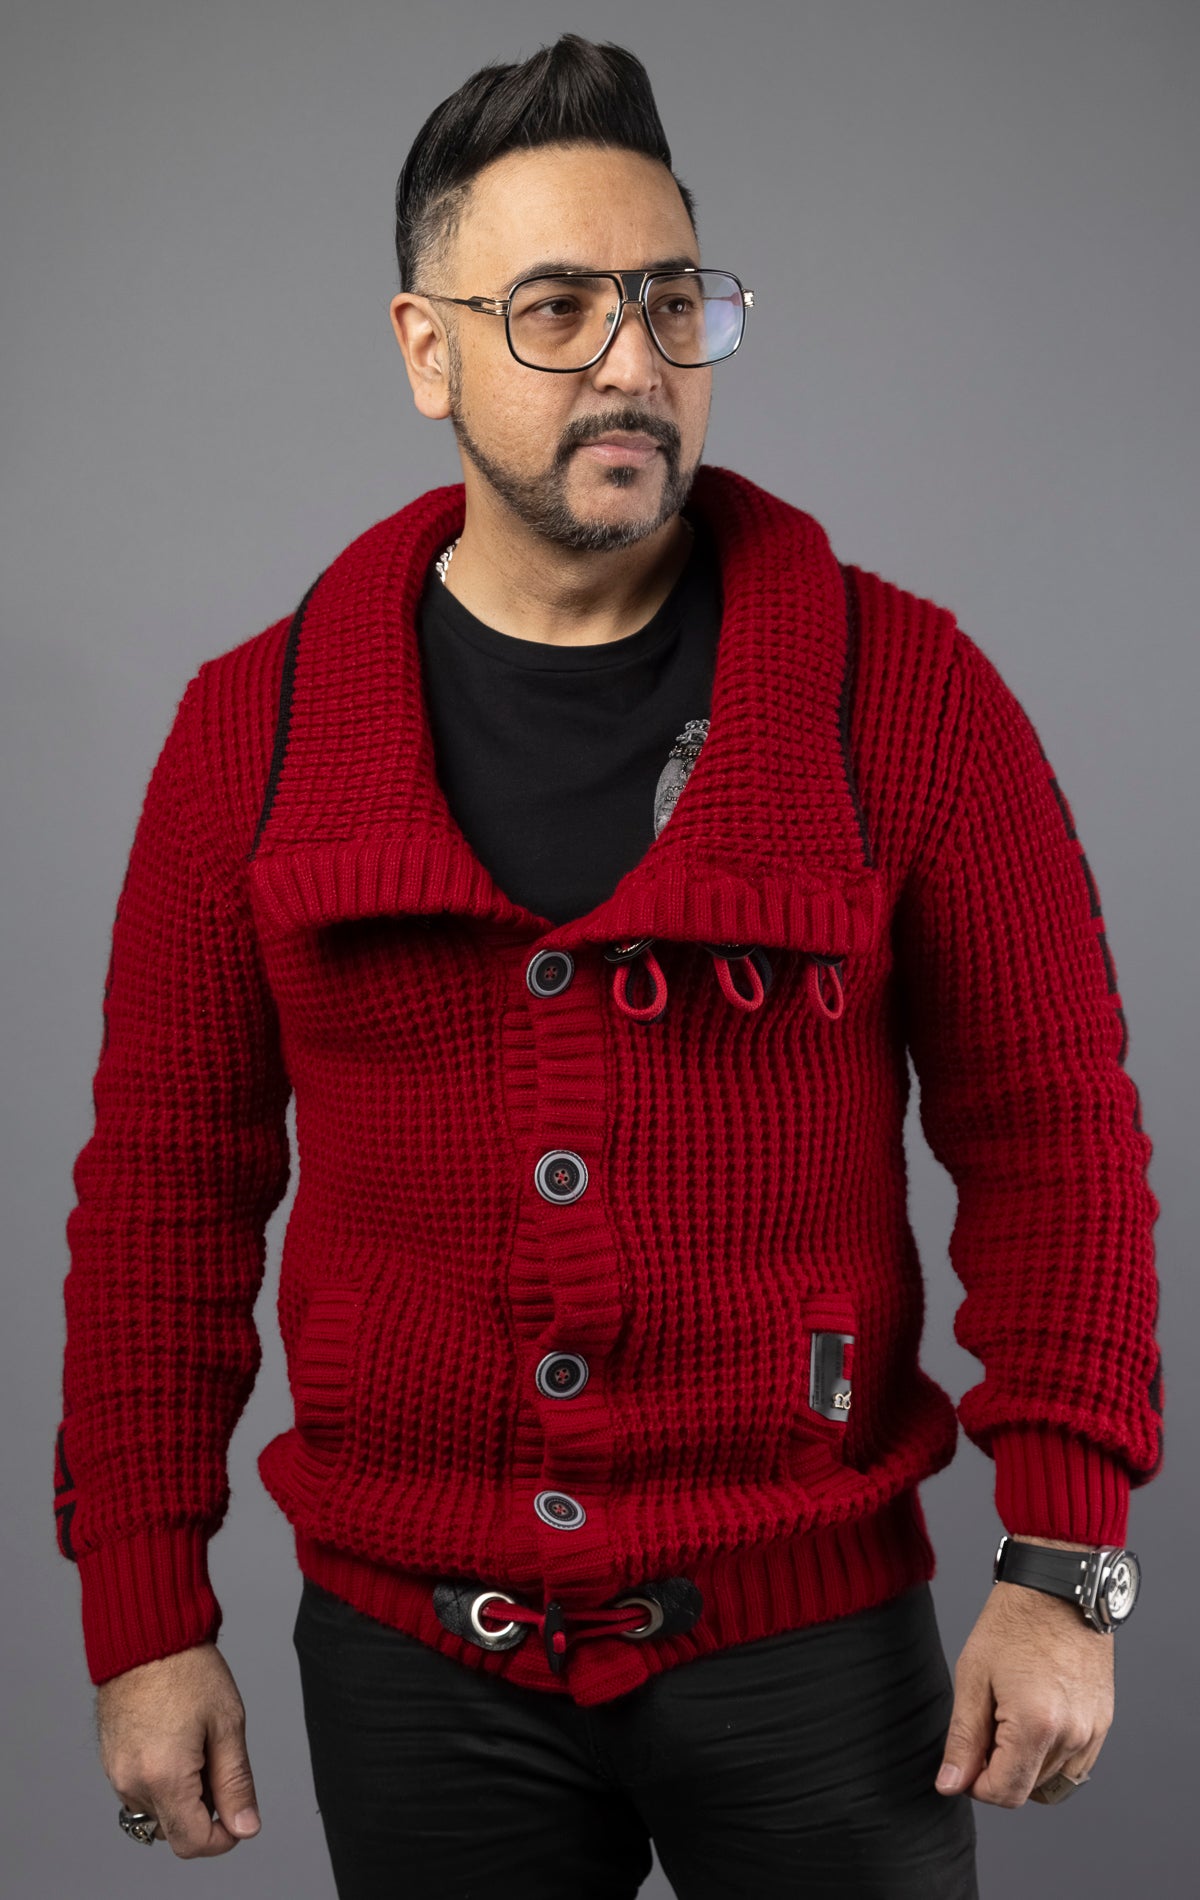 Red slim-fit luxury sweater. Featuring a heavy weight construction